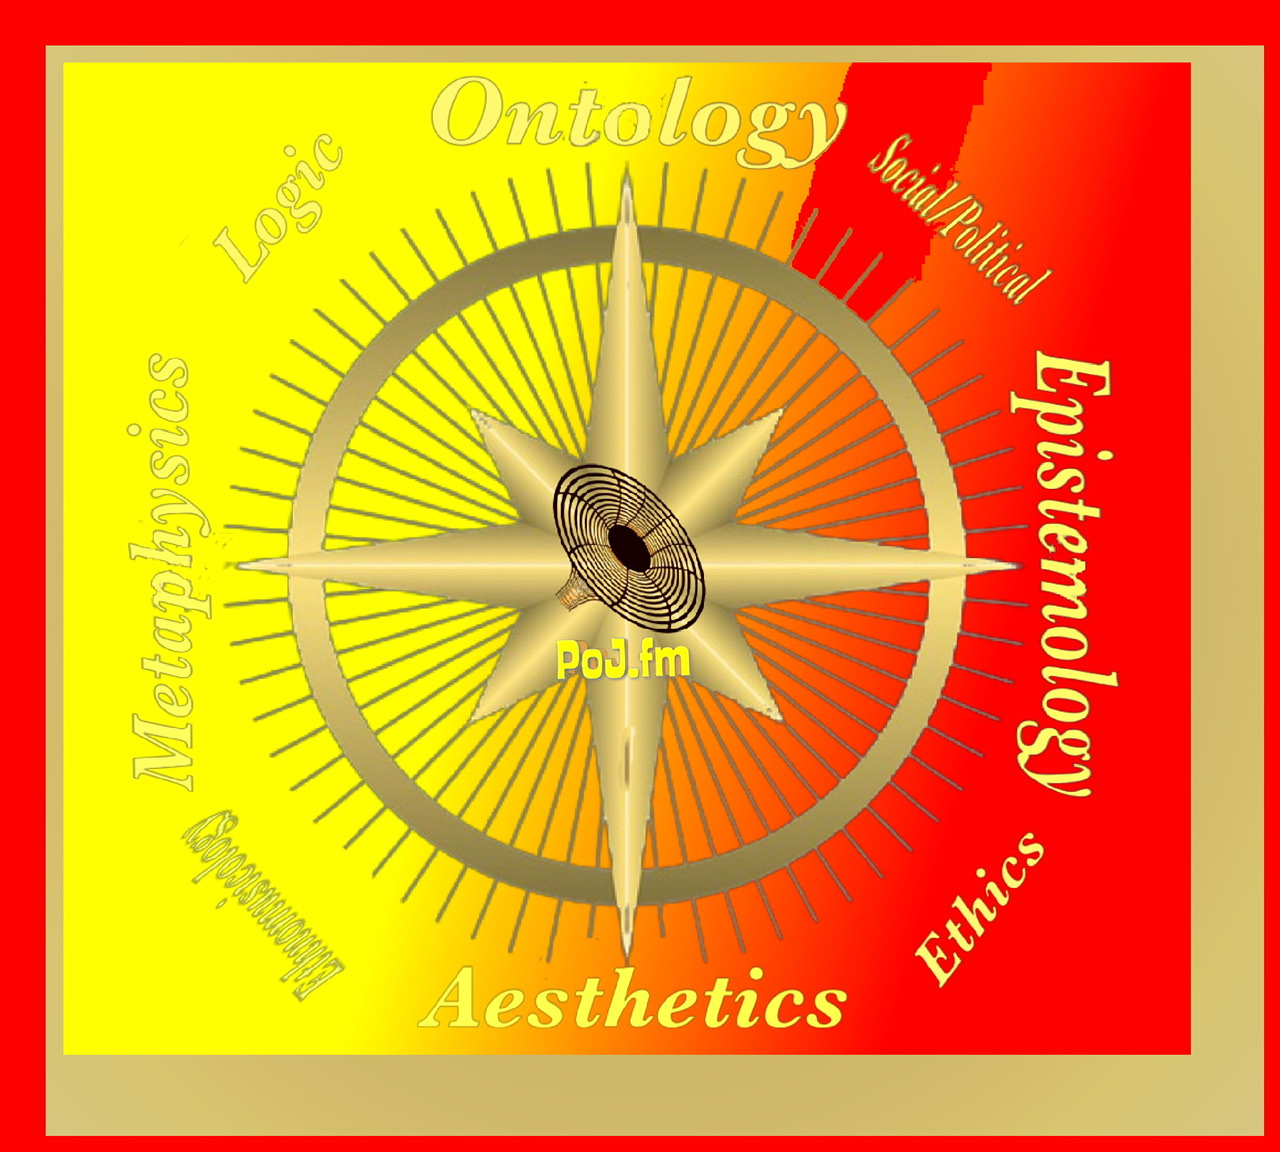 A framed graphic of a golden compass labeled with the fields of philosophy at various central compass points with a PoJ.fm logo at its center on a mixed red and faded yellow background.